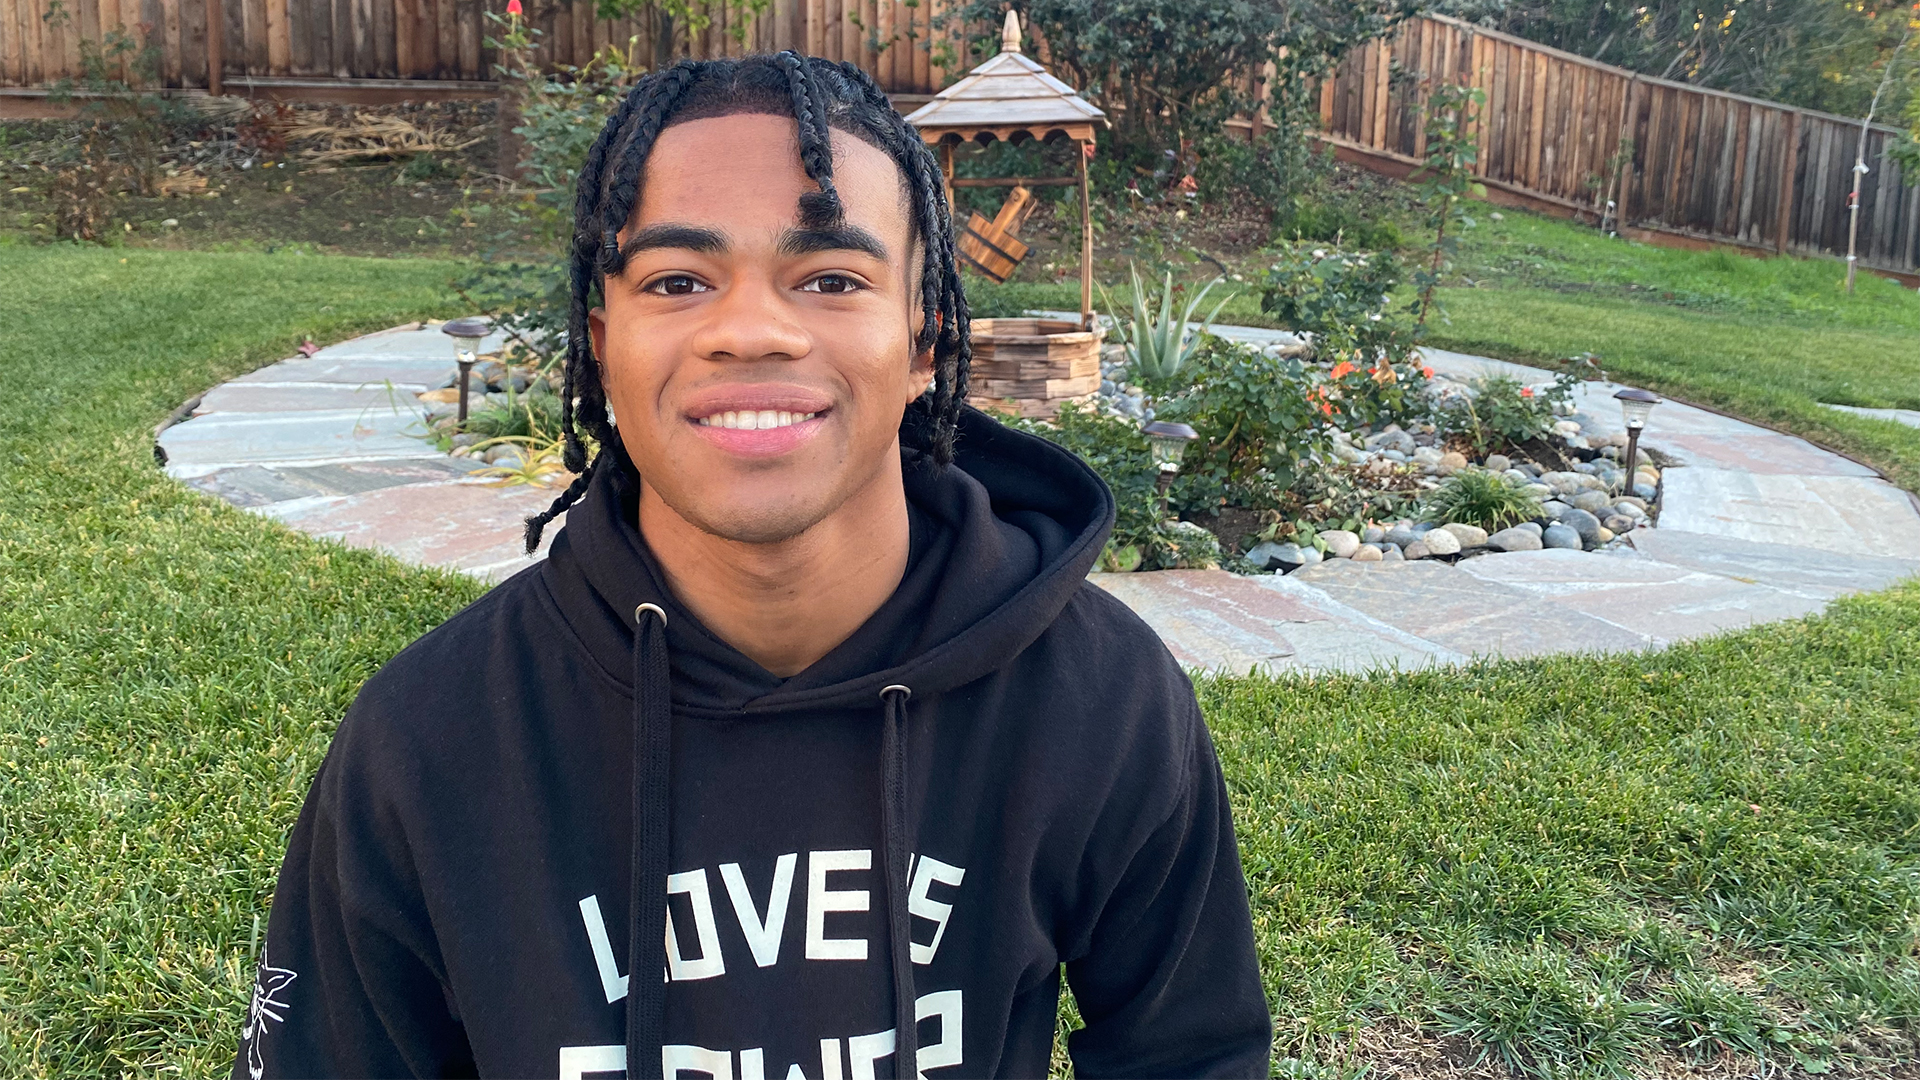 Teen Founder Who Became The First Black Valedictorian At His High School Finishes First Year At Stanford With A 4.05 GPA